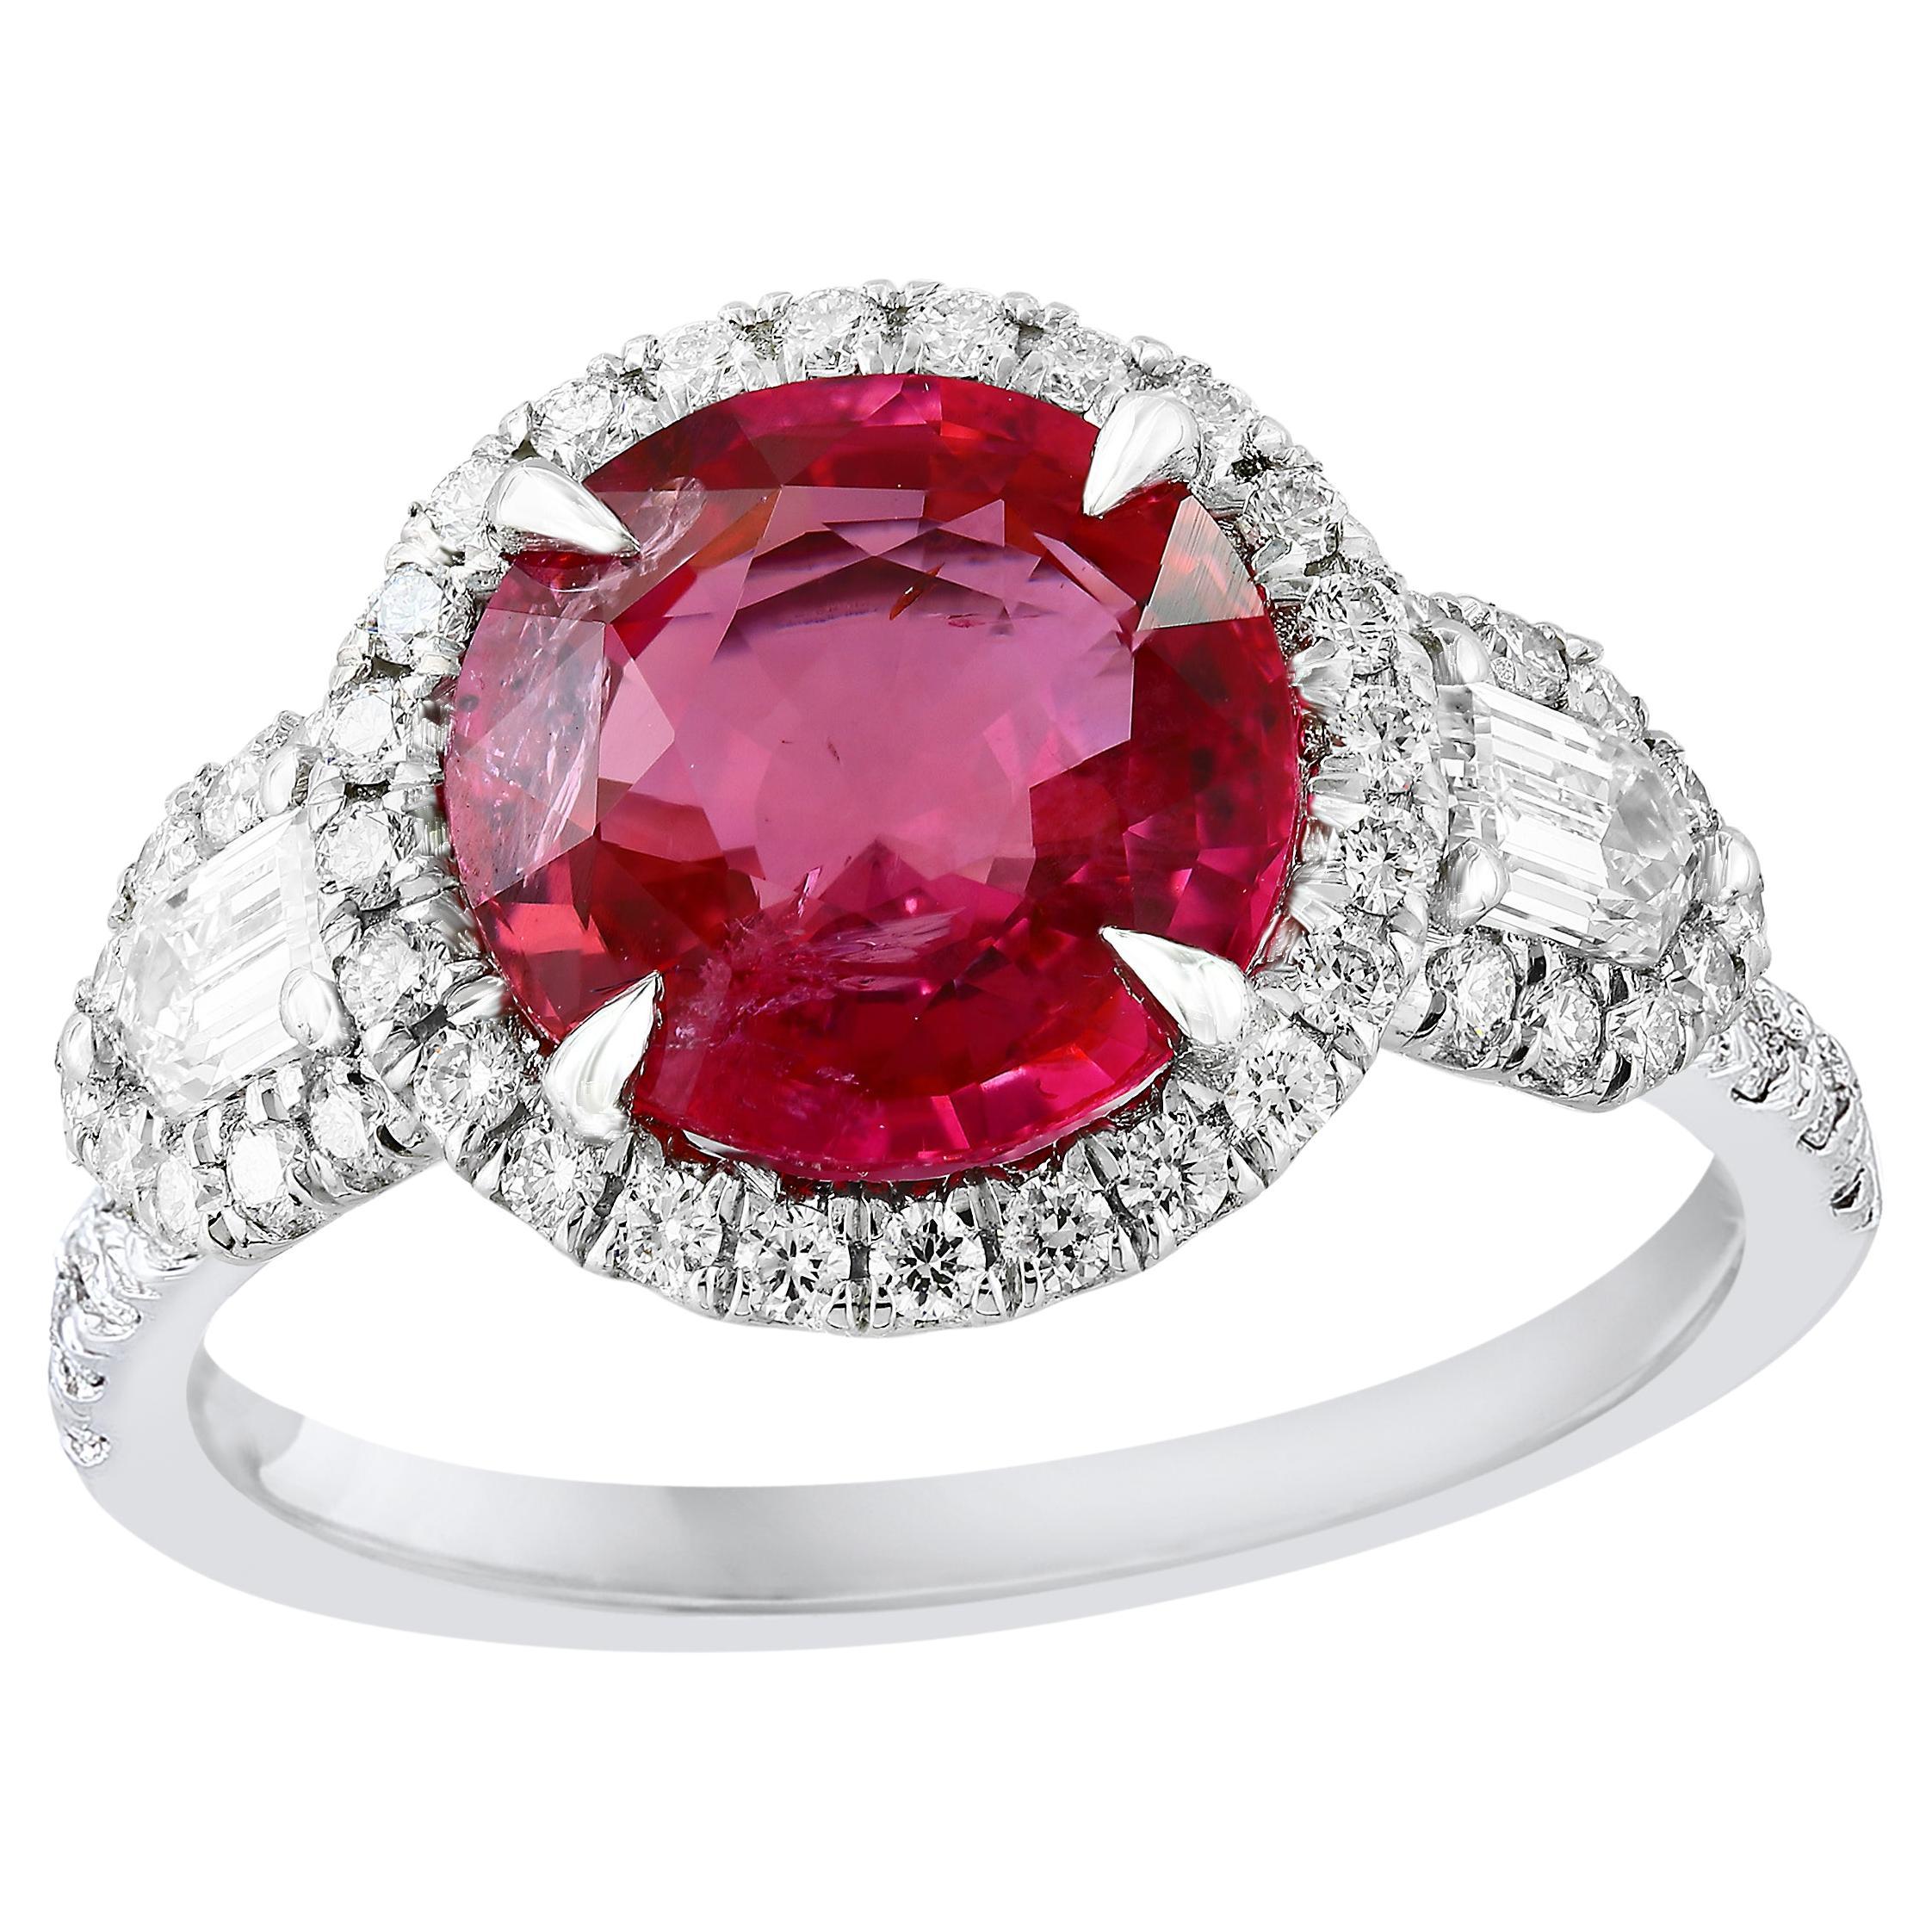 3.28 Carat Round Cut Ruby and Diamond 3 Stone Halo Ring in Platinum For Sale